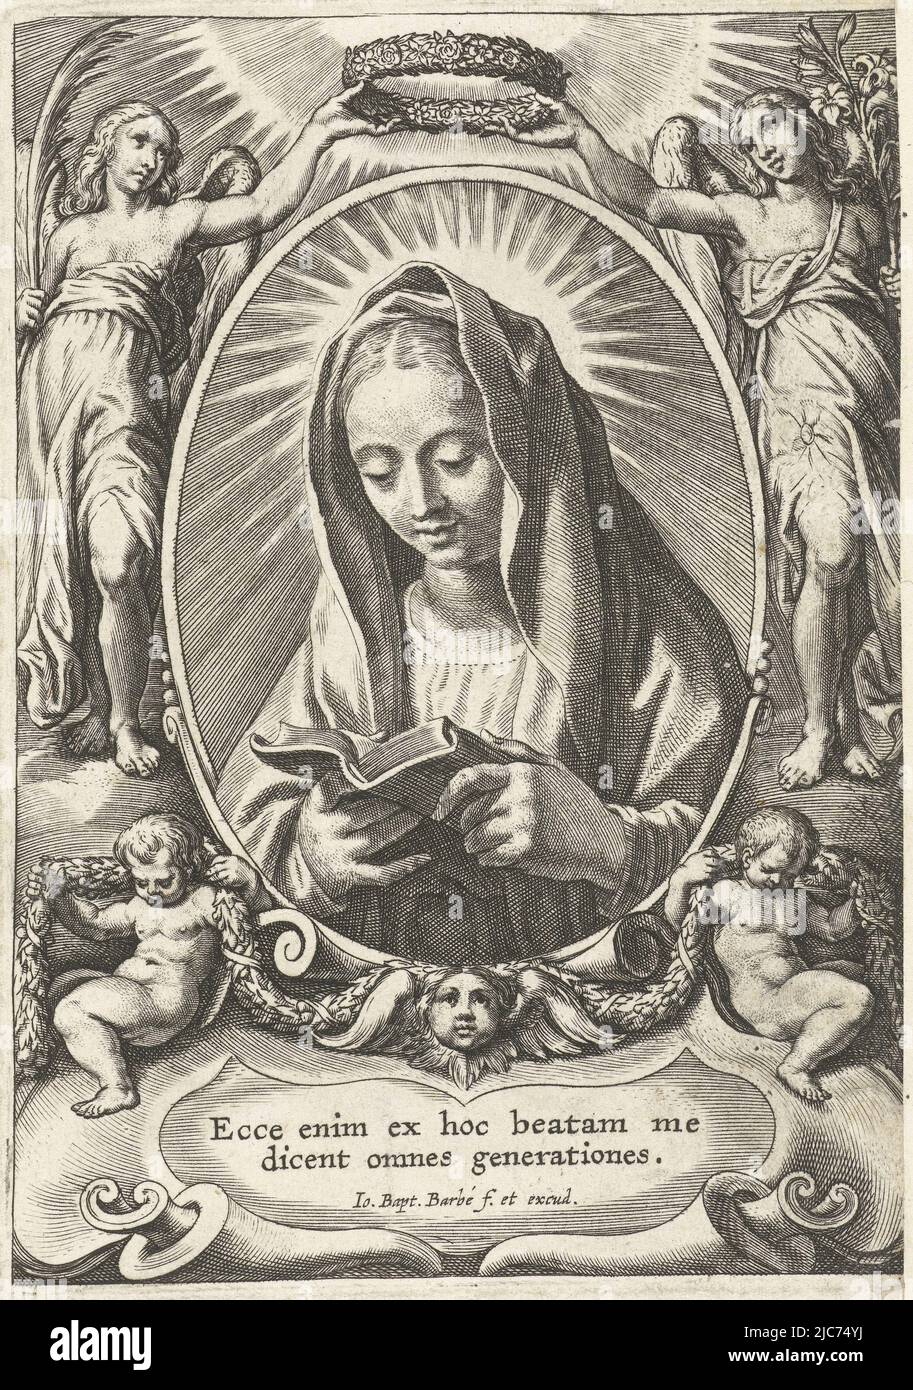 Mary reading in book in oval frame flanked by angels with lily and palm branch. In a cartouche is the text in Latin from the Magnificat, a hymn to Mary: From now on everyone praises me. Mary with book SS. Apostolorum et Evangelistorum Icones , print maker: Jan-Baptist Barbé, (mentioned on object), intermediary draughtsman: Theodoor van Loon, publisher: Jan-Baptist Barbé, (mentioned on object), 1588 - 1648, paper, engraving, h 129 mm × w 94 mm Stock Photo